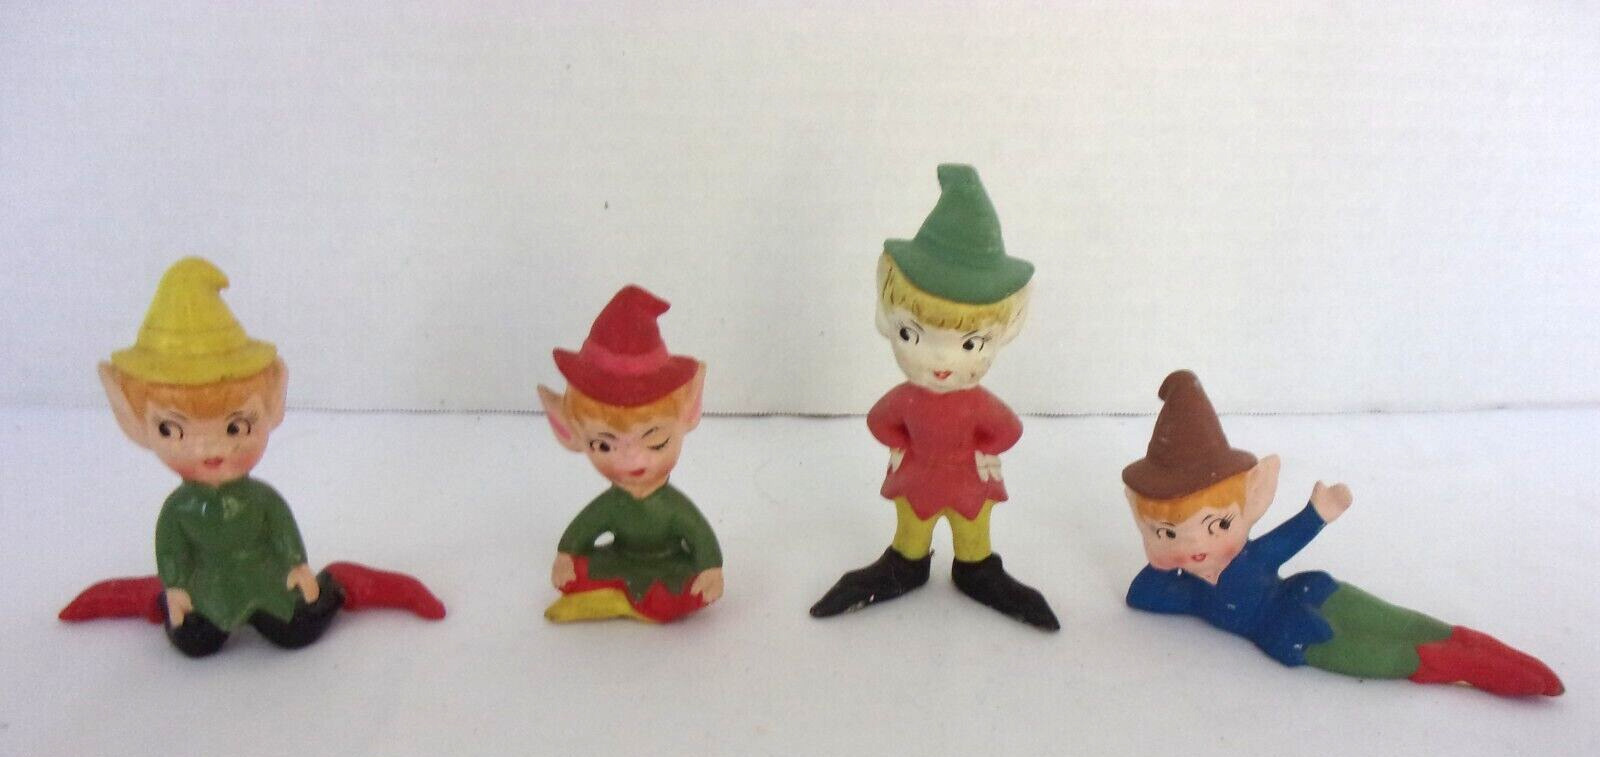 Vintage Pixies Elves Figurines OUR OWN IMPORTS Japan Lot of 4